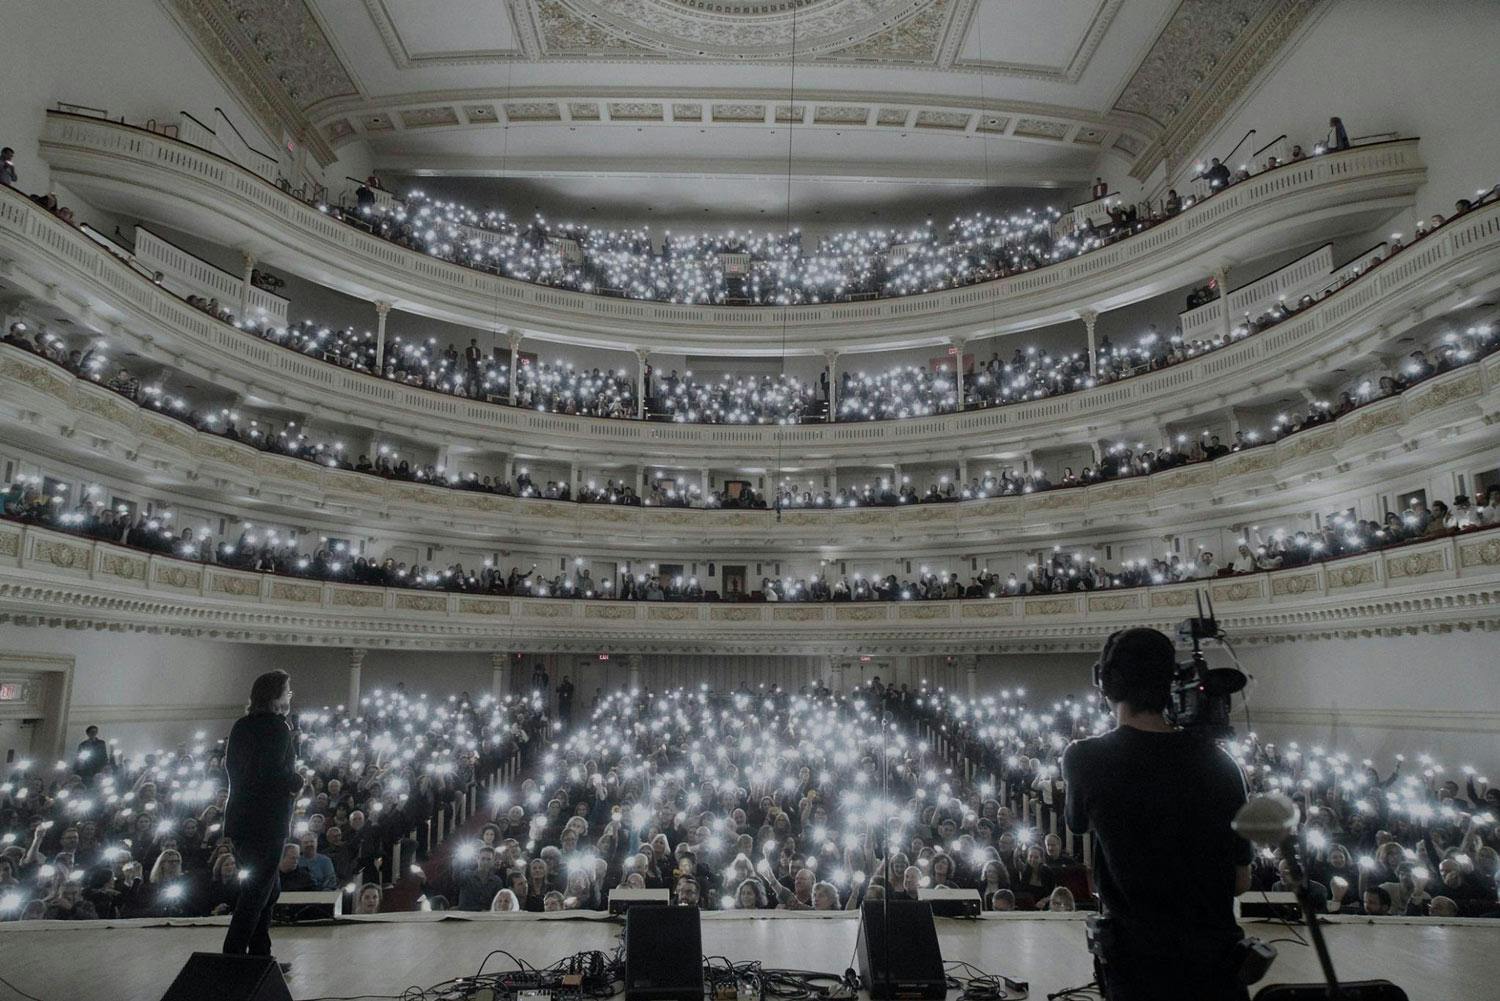 A packed, multi-storey auditorium of people hold small lamps, lighting up the entire space.